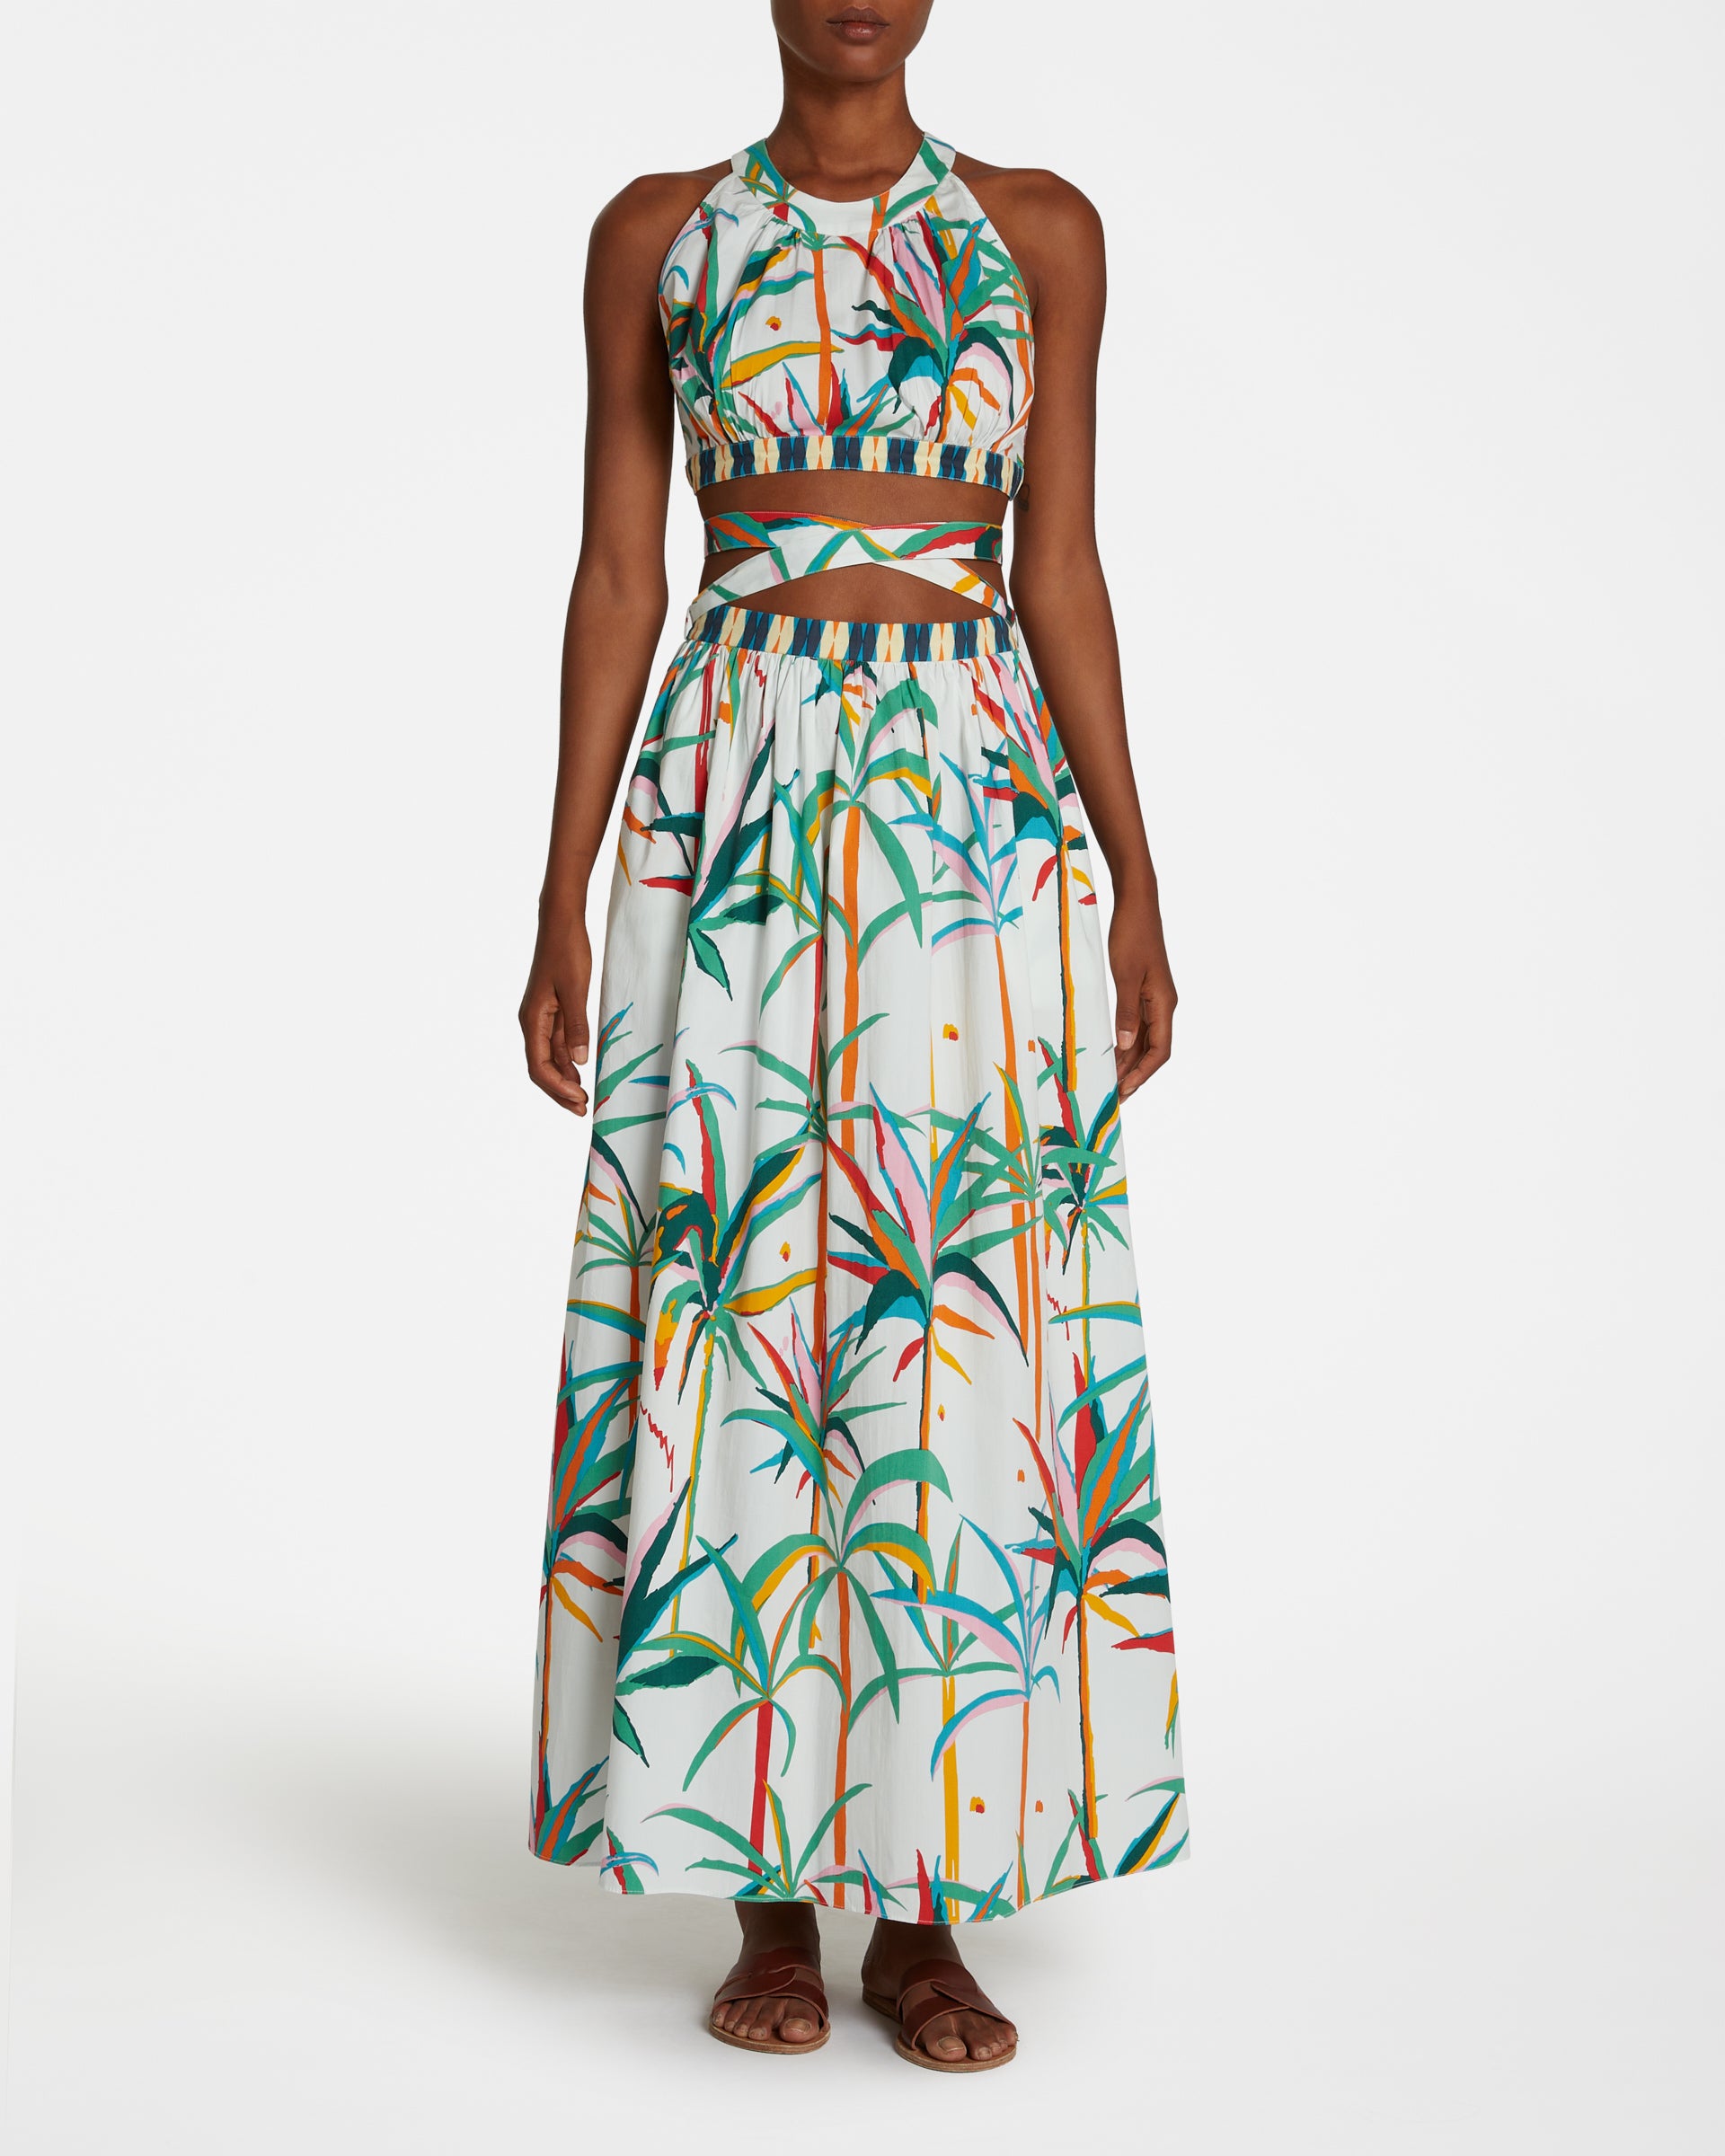 Alaia Dress in Tropical Sunset